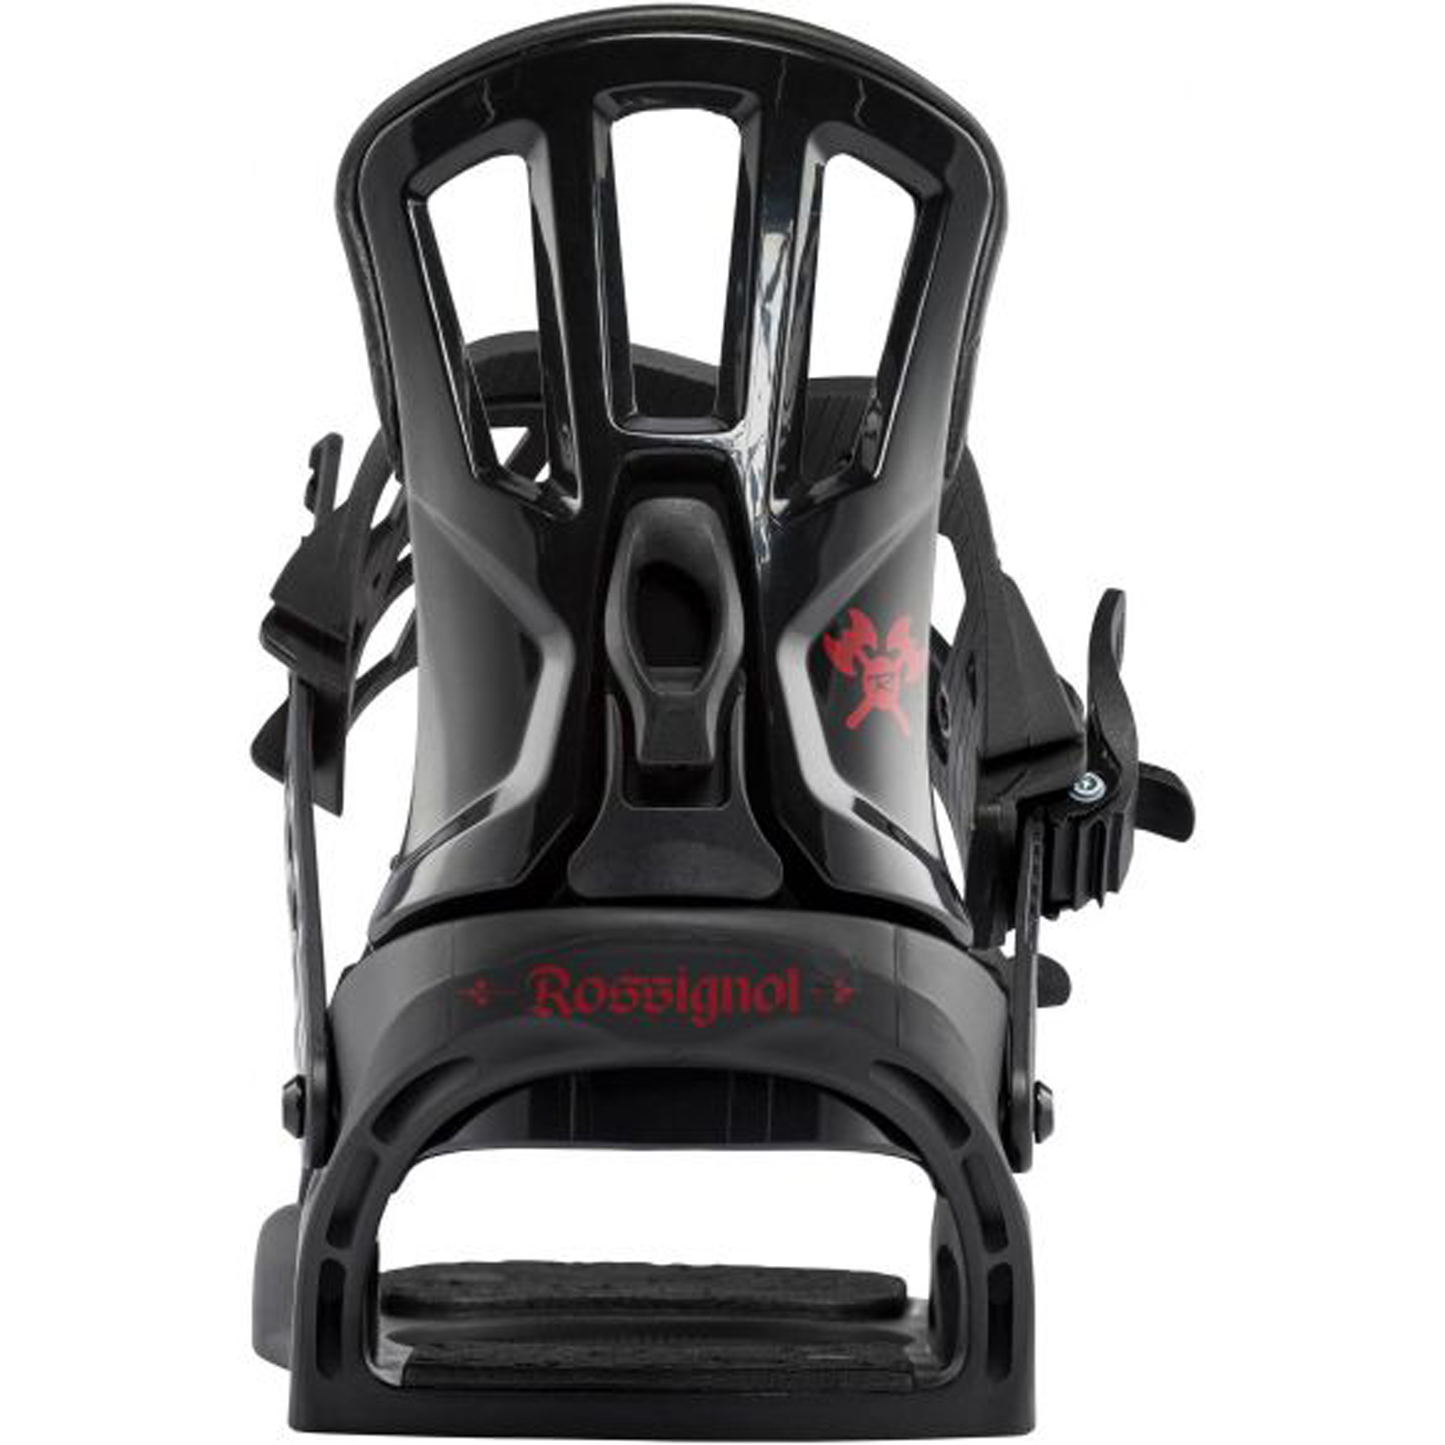 the rossignol battle snowboard binding in black and red